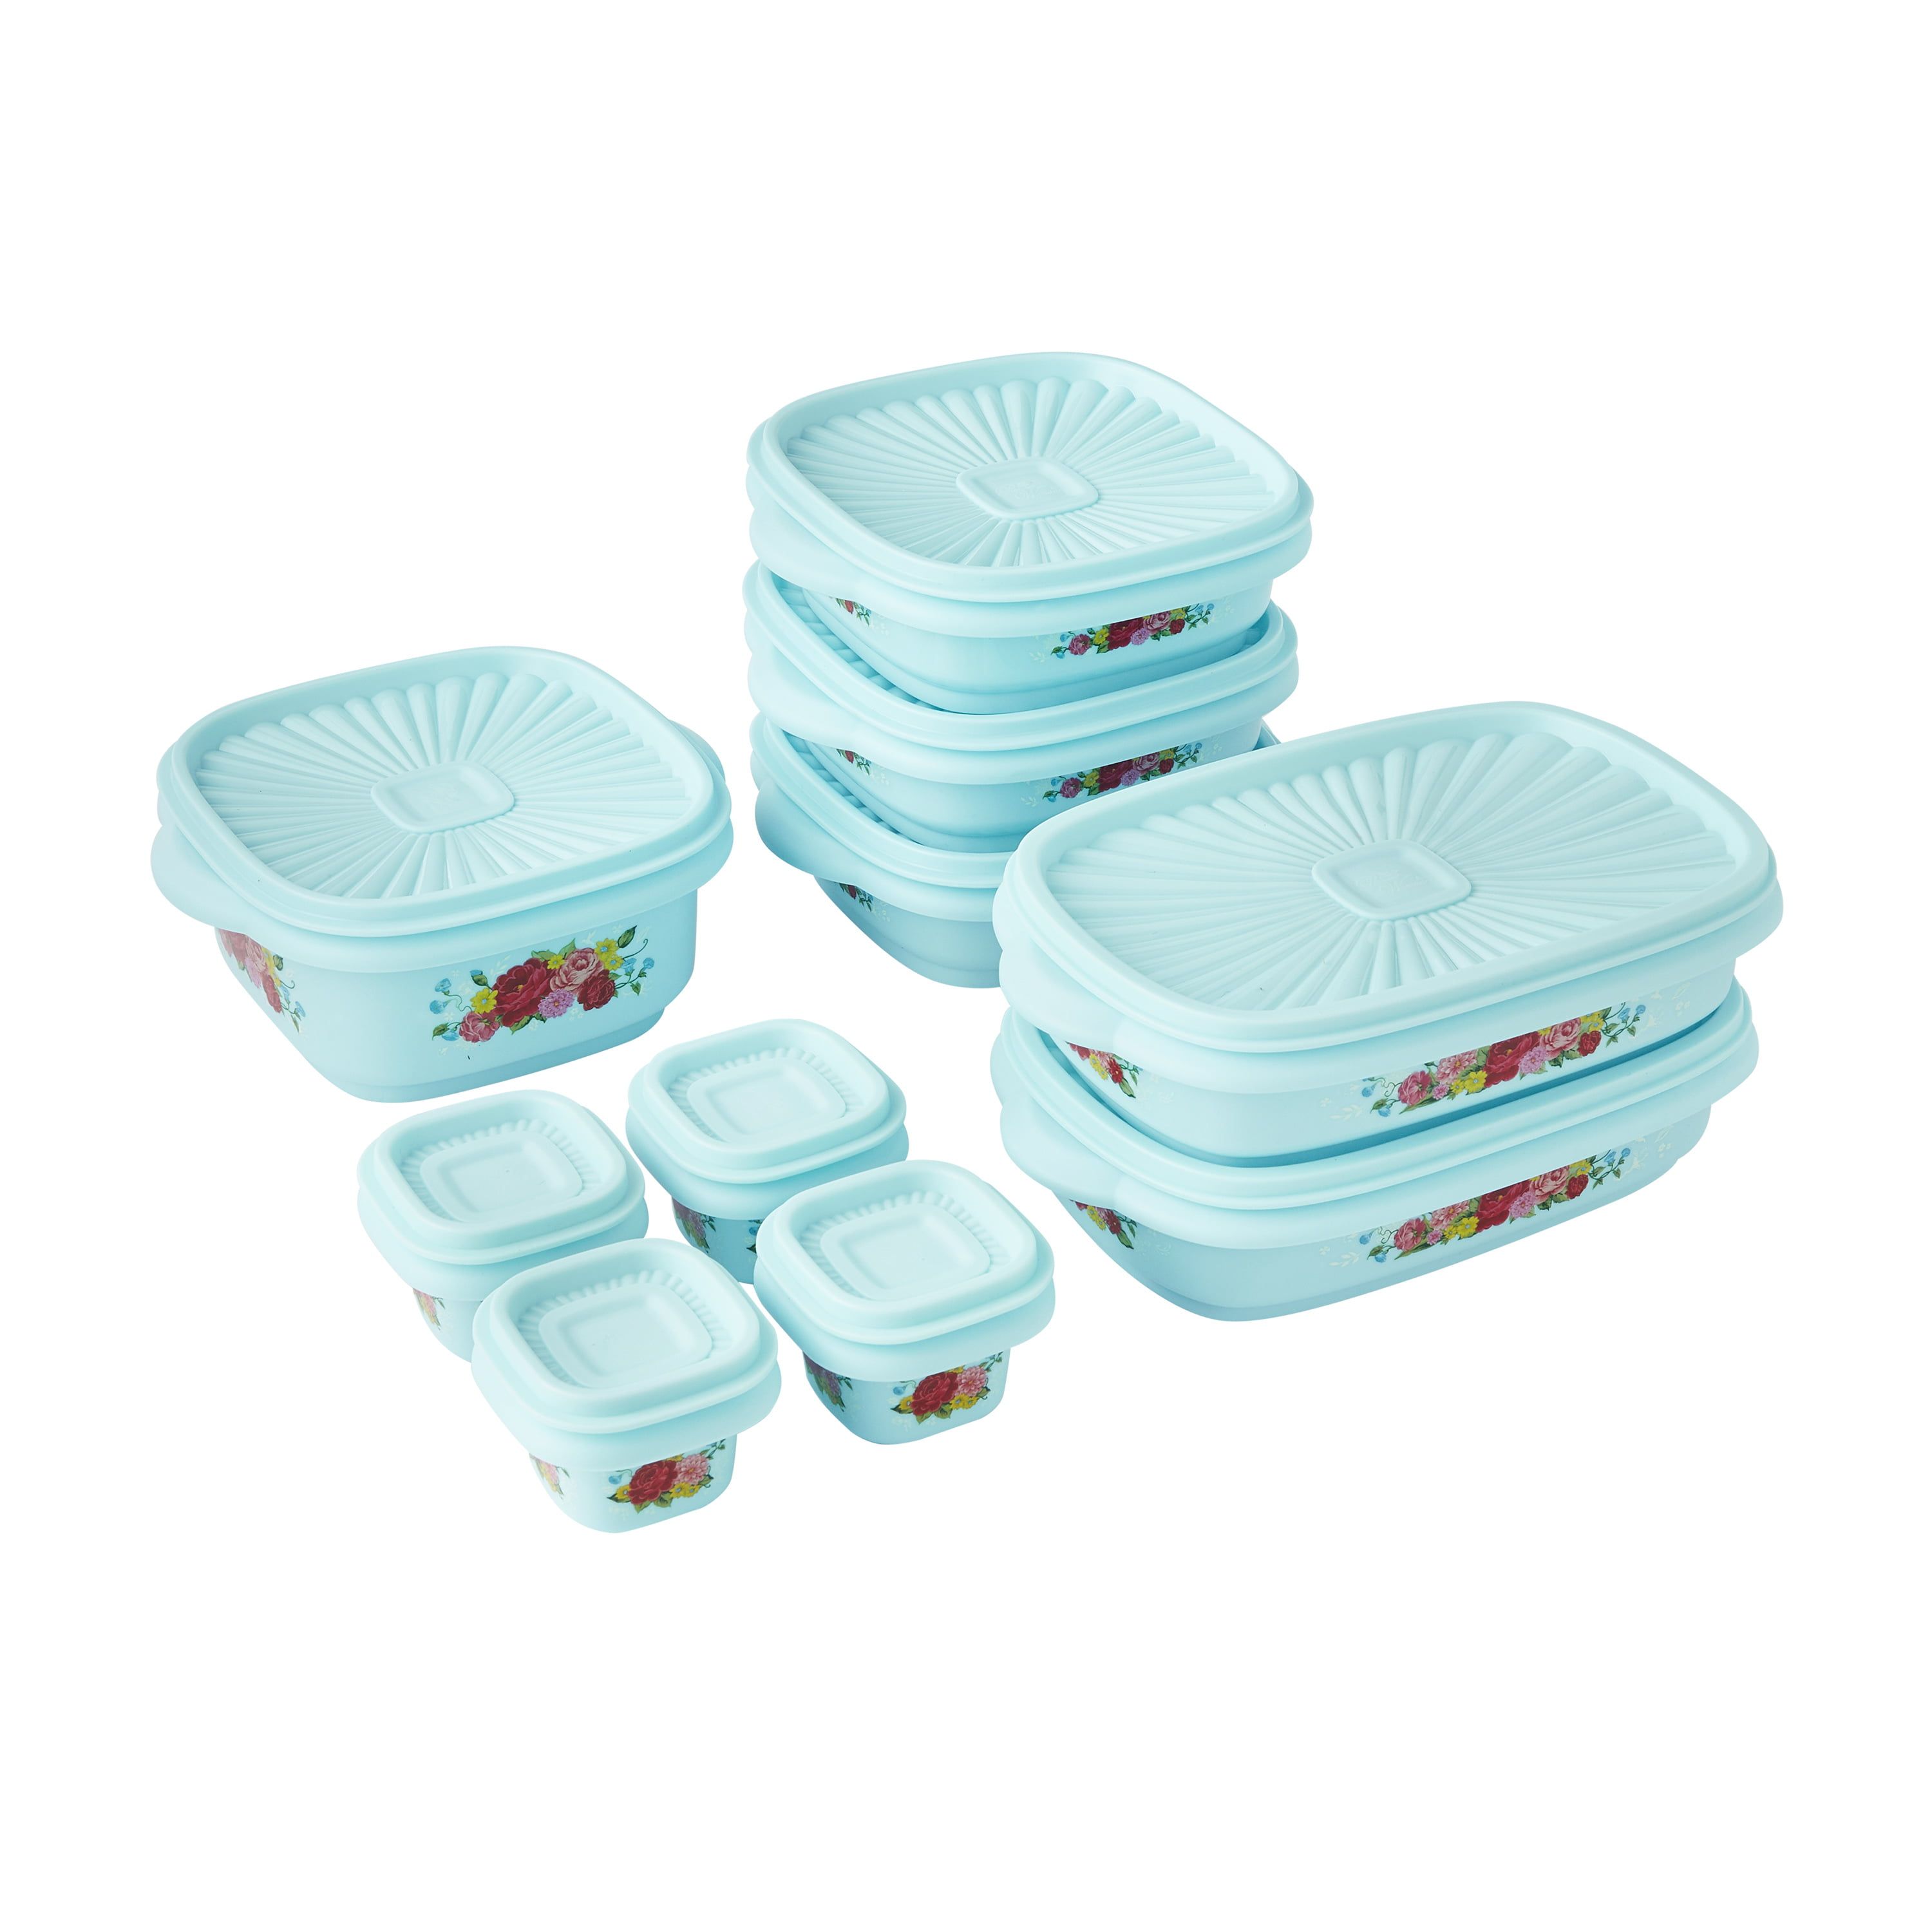 The Pioneer Woman Sweet Rose Food Storage Container Set